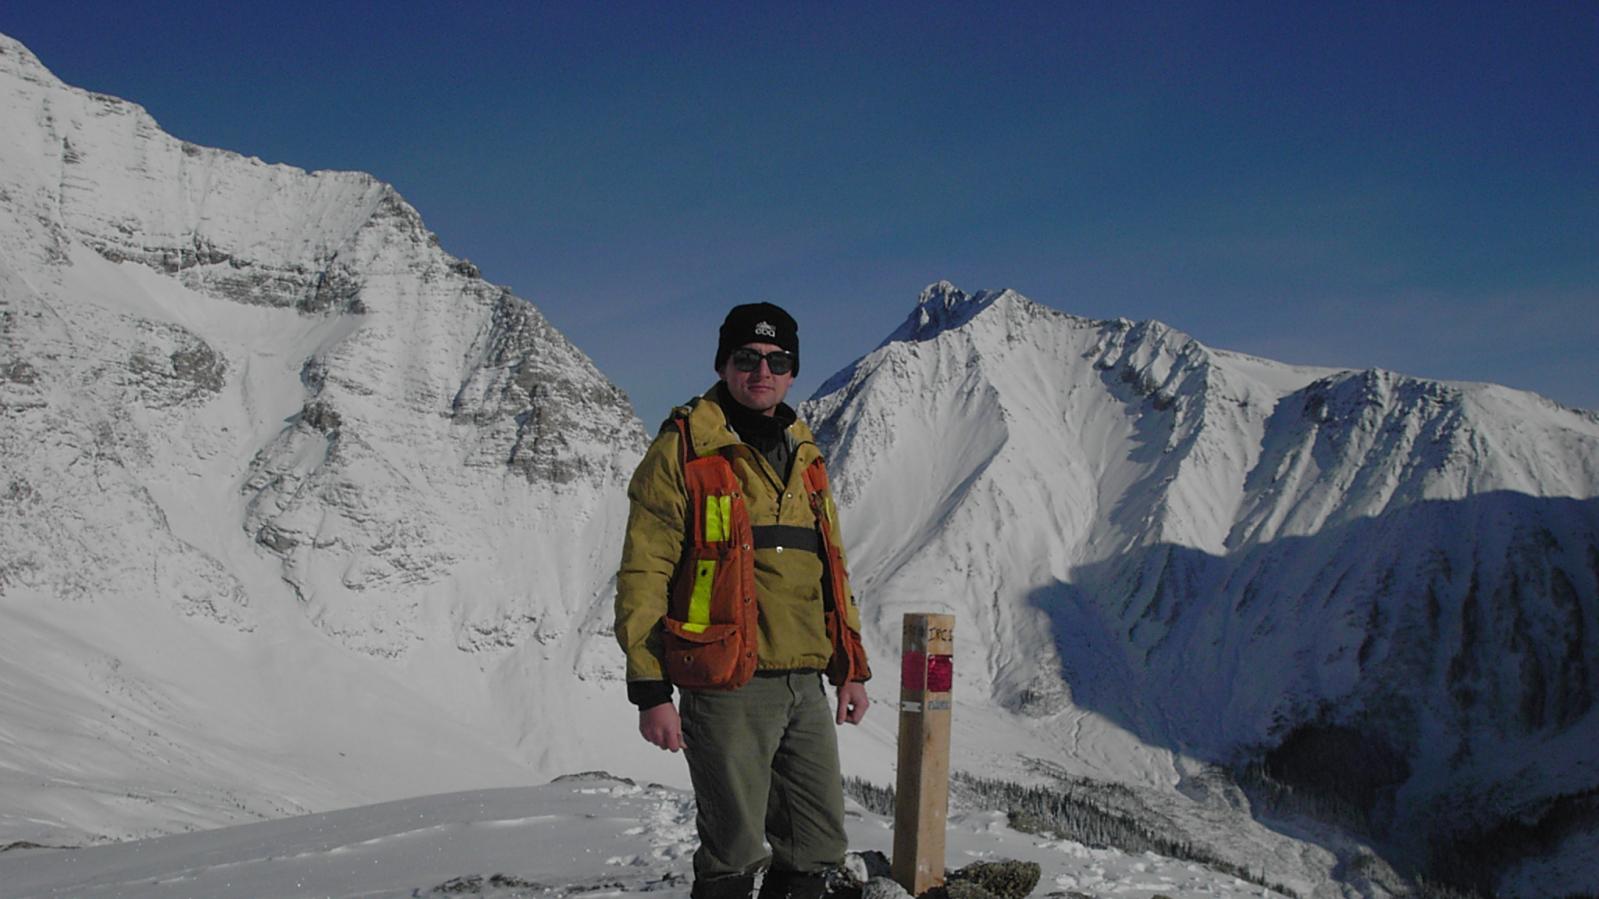 A geologist posing with mineral claim post in a snowy mountain landscape 